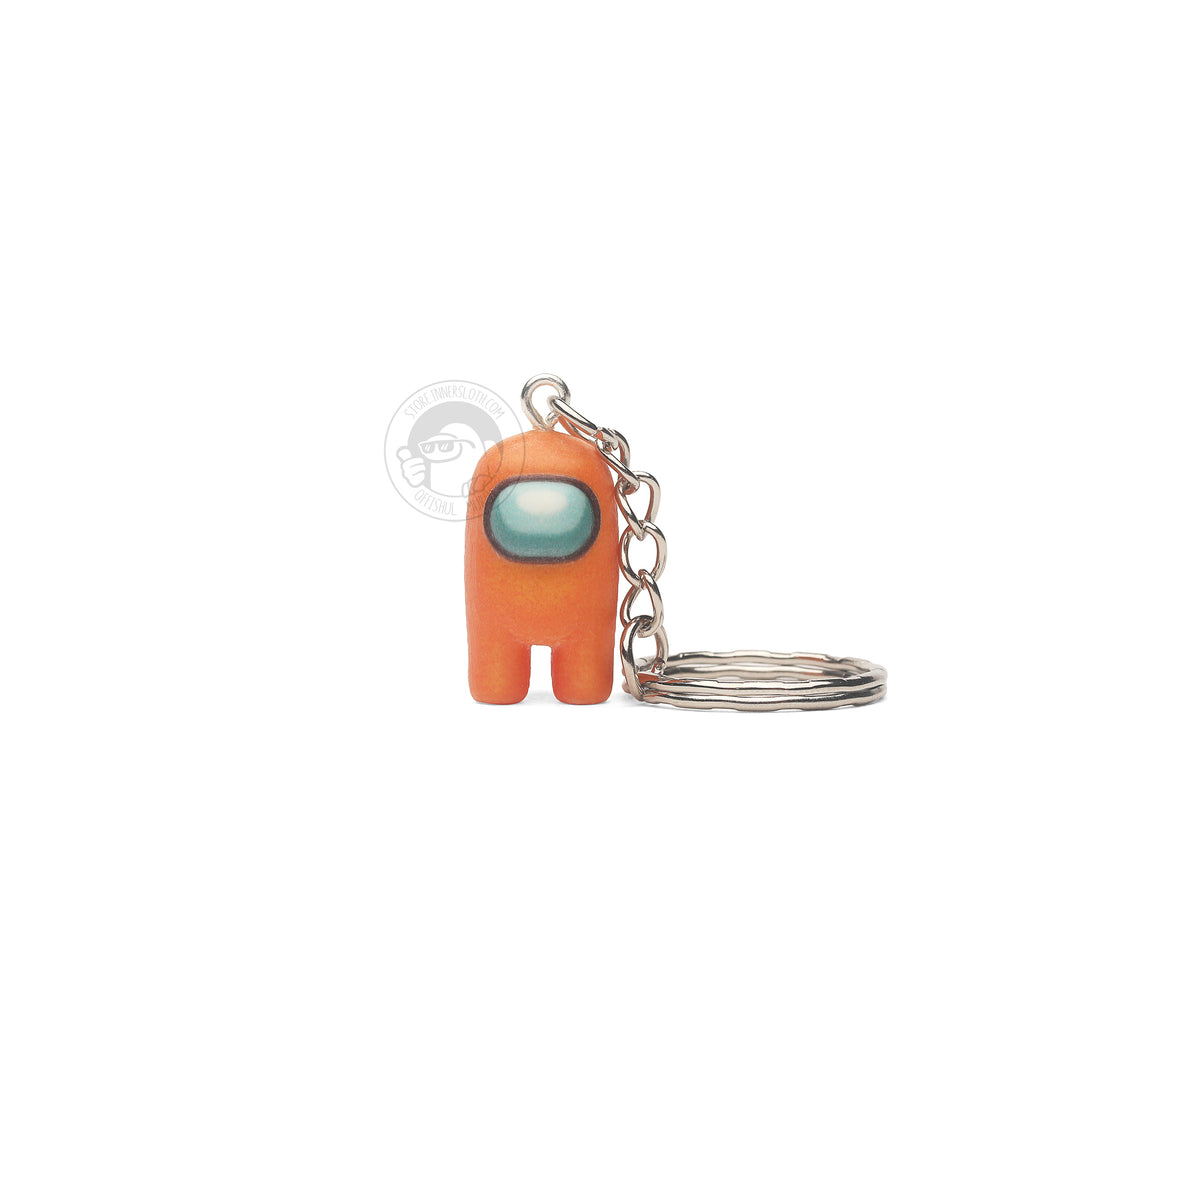 A product photo of the Among Us: Crewmate Keychain by Objex Unlimited Inc. in orange. It is standing, and a silver keychain rests beside it.